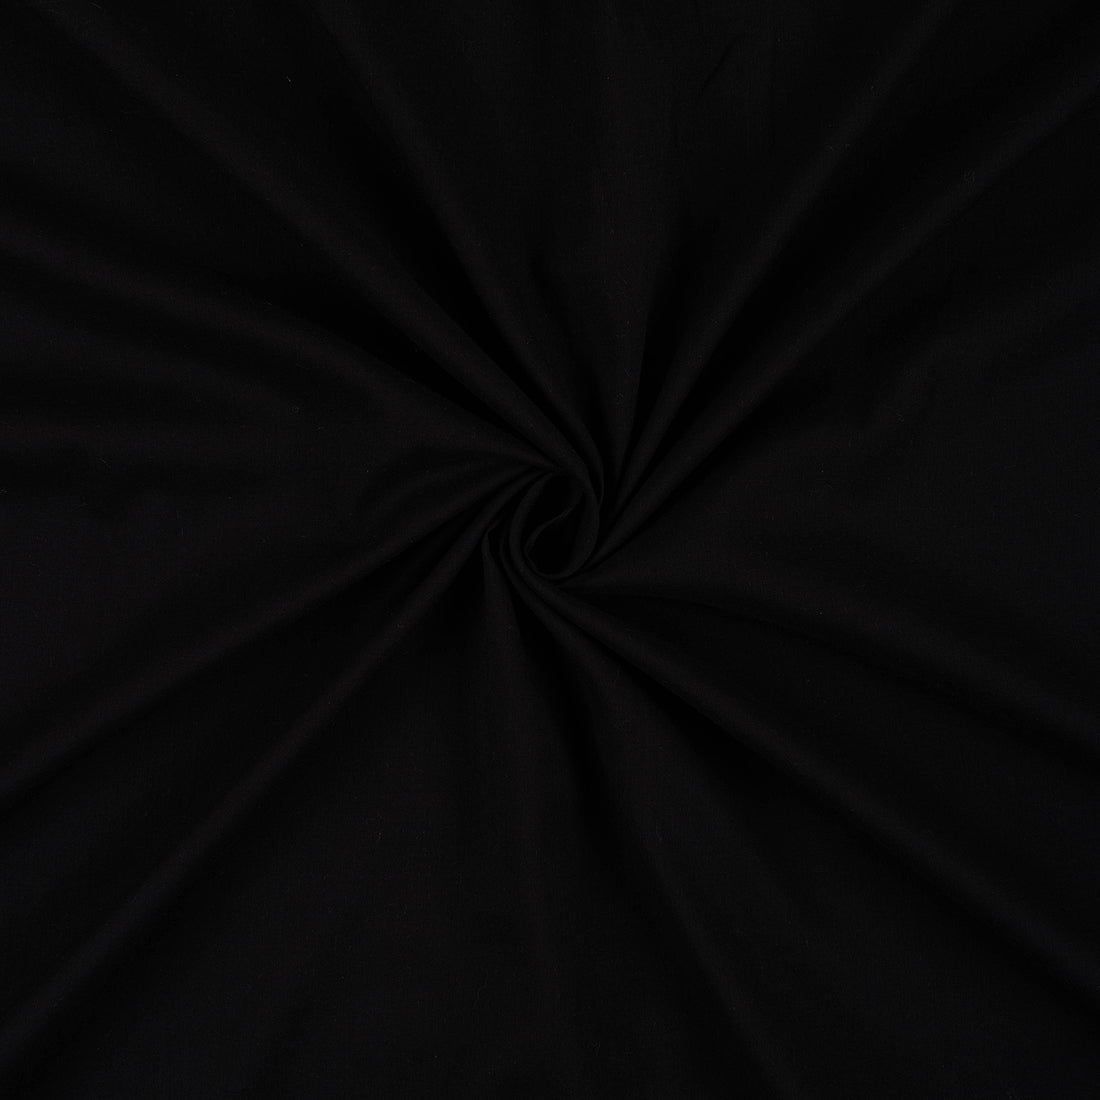 Pure Cotton Natural Dyed Solid Plan Black Fabric Online